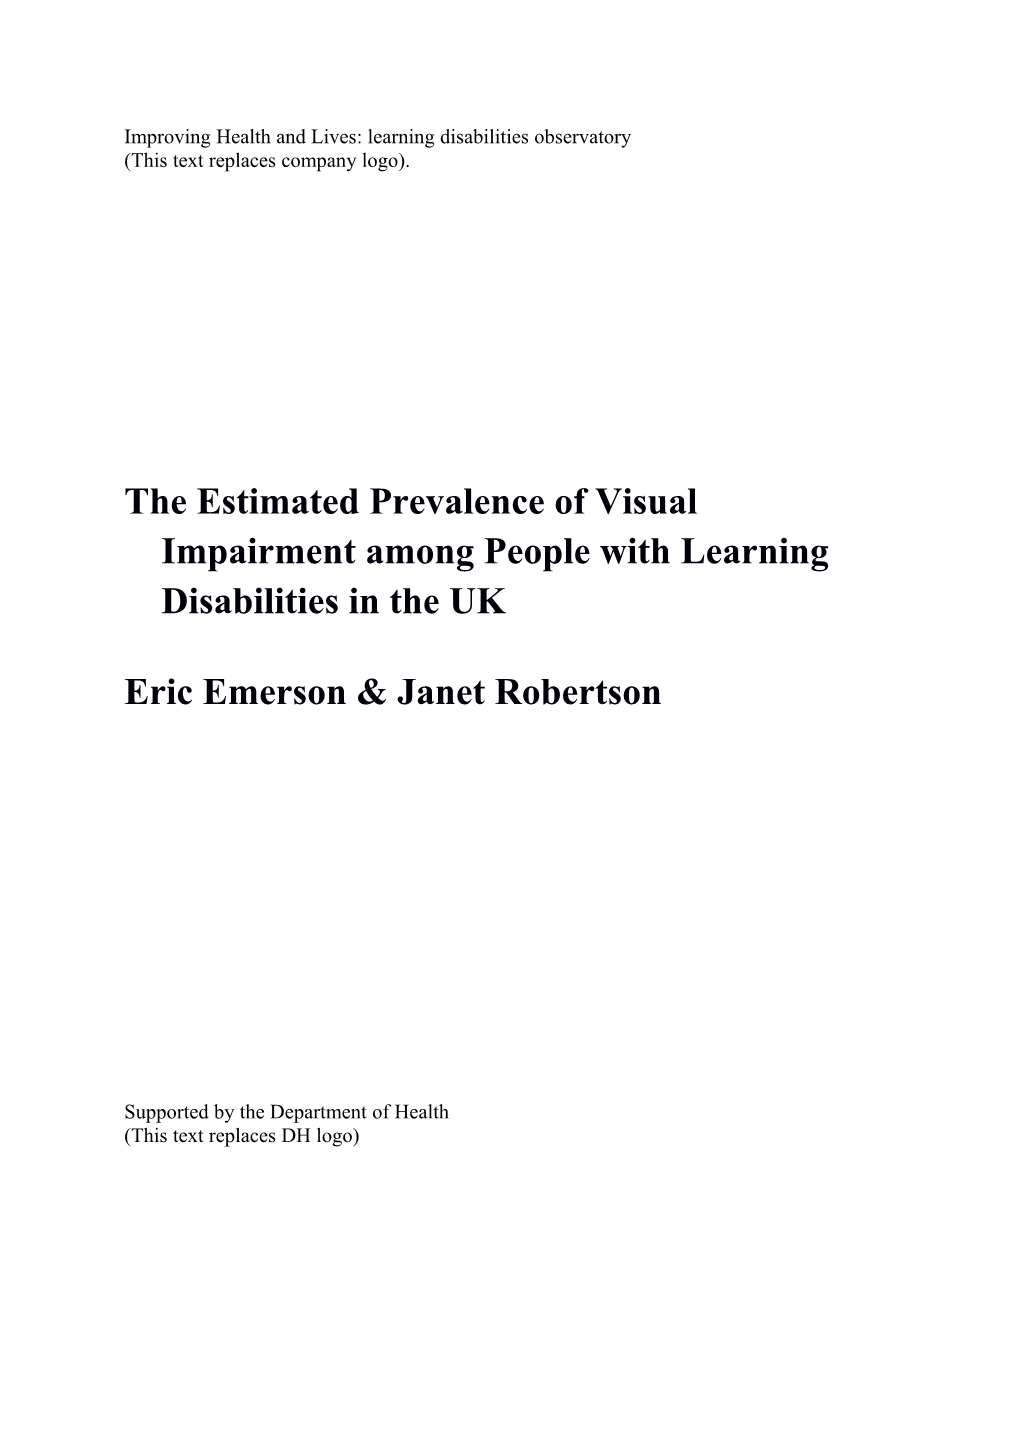 The Estimated Prevalence of Visual Impairment Among People with Learning Disabilities in the UK